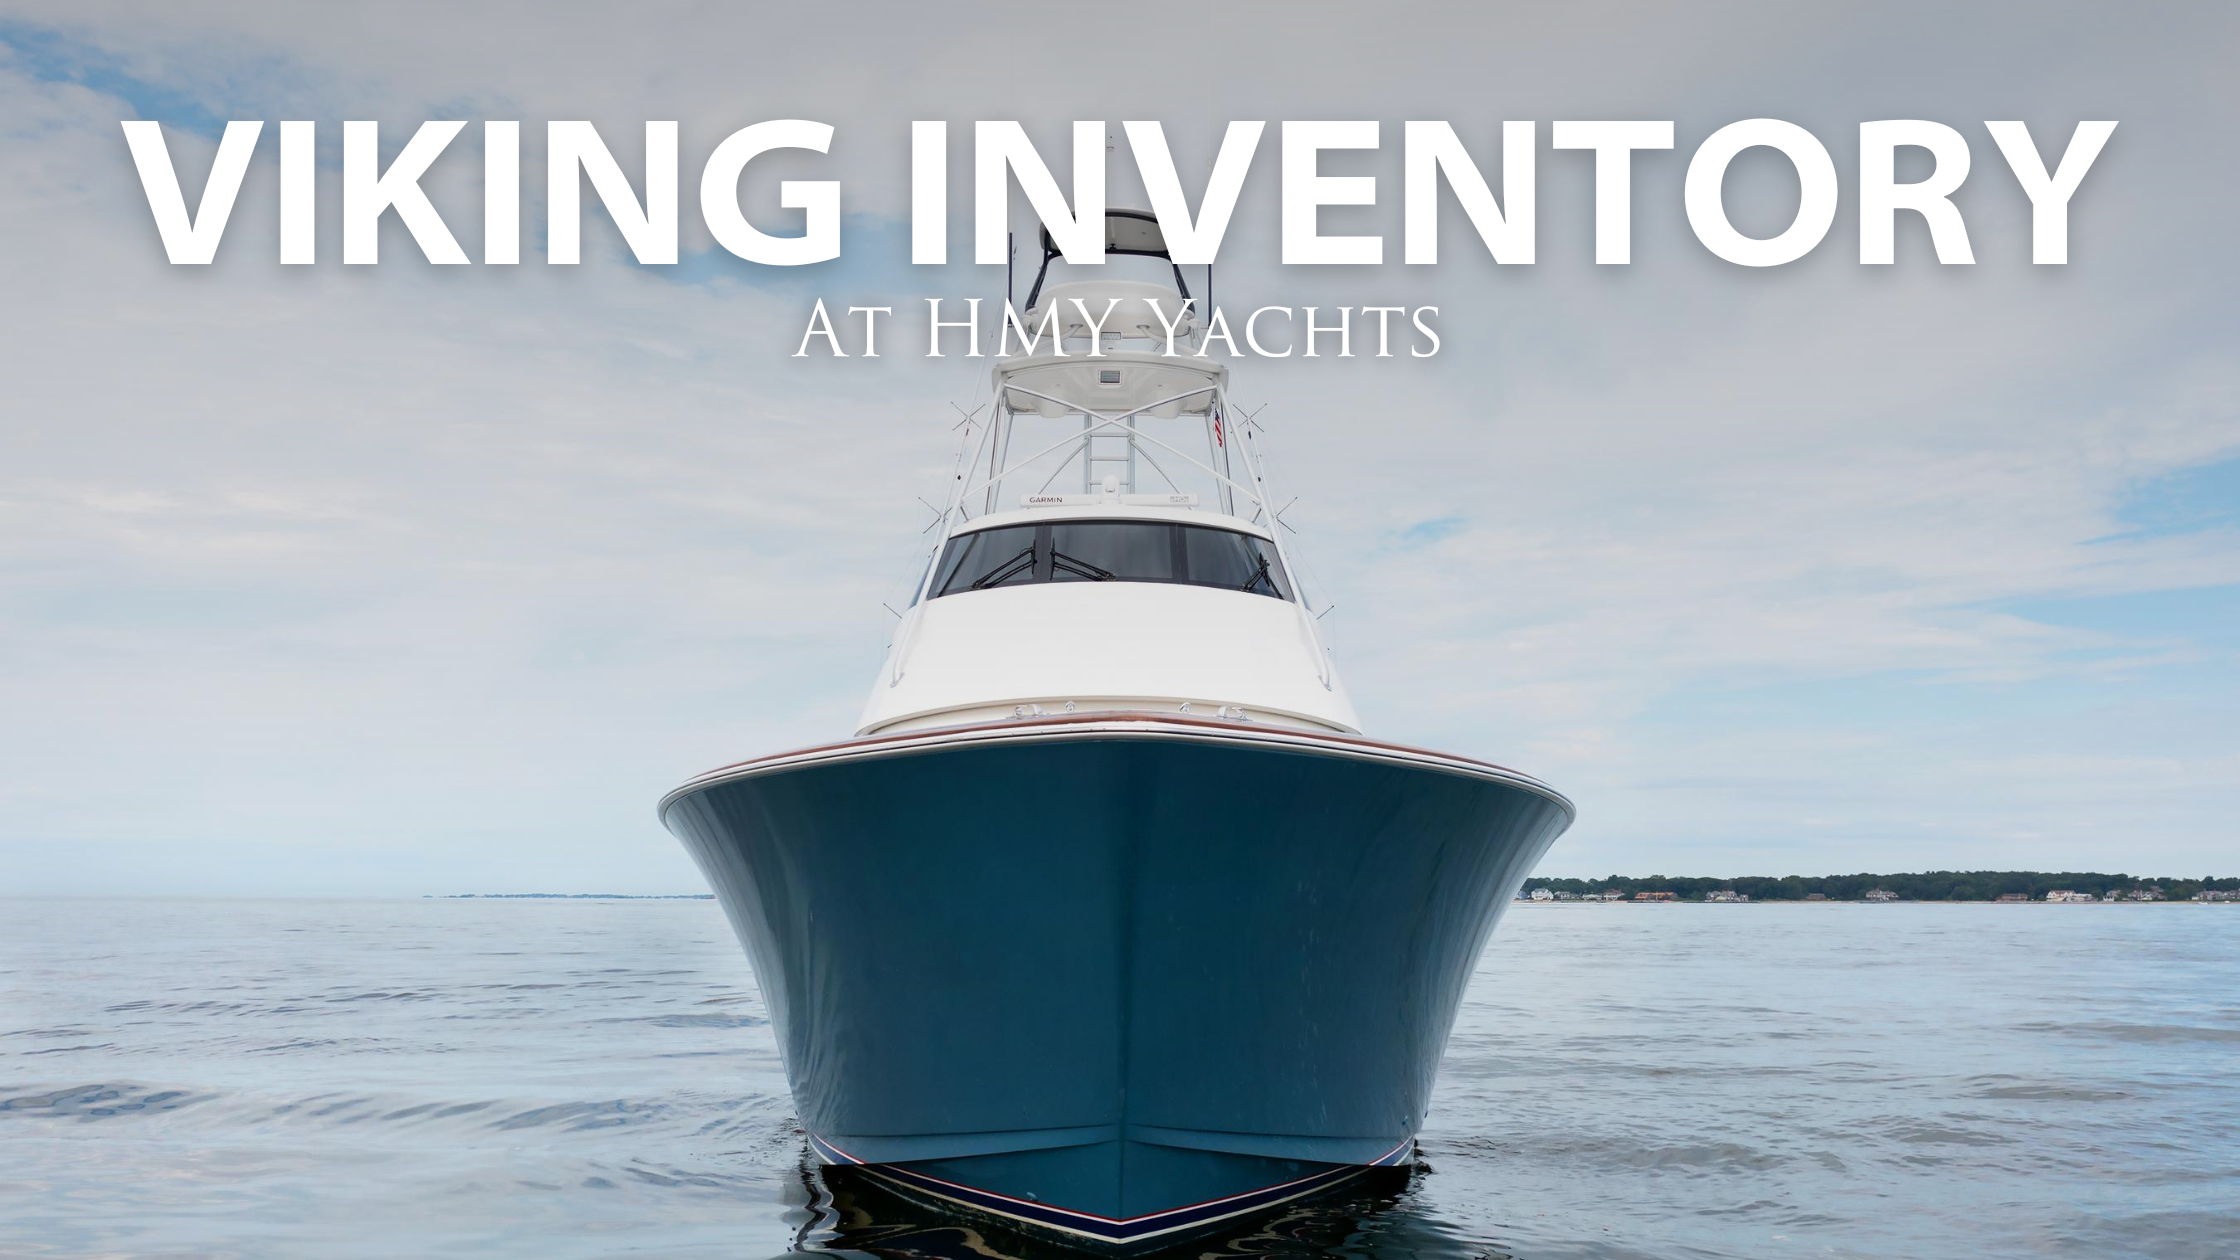 Can’t Wait for Boat Show Season? Allow Our Viking Inventory to Tide You Over